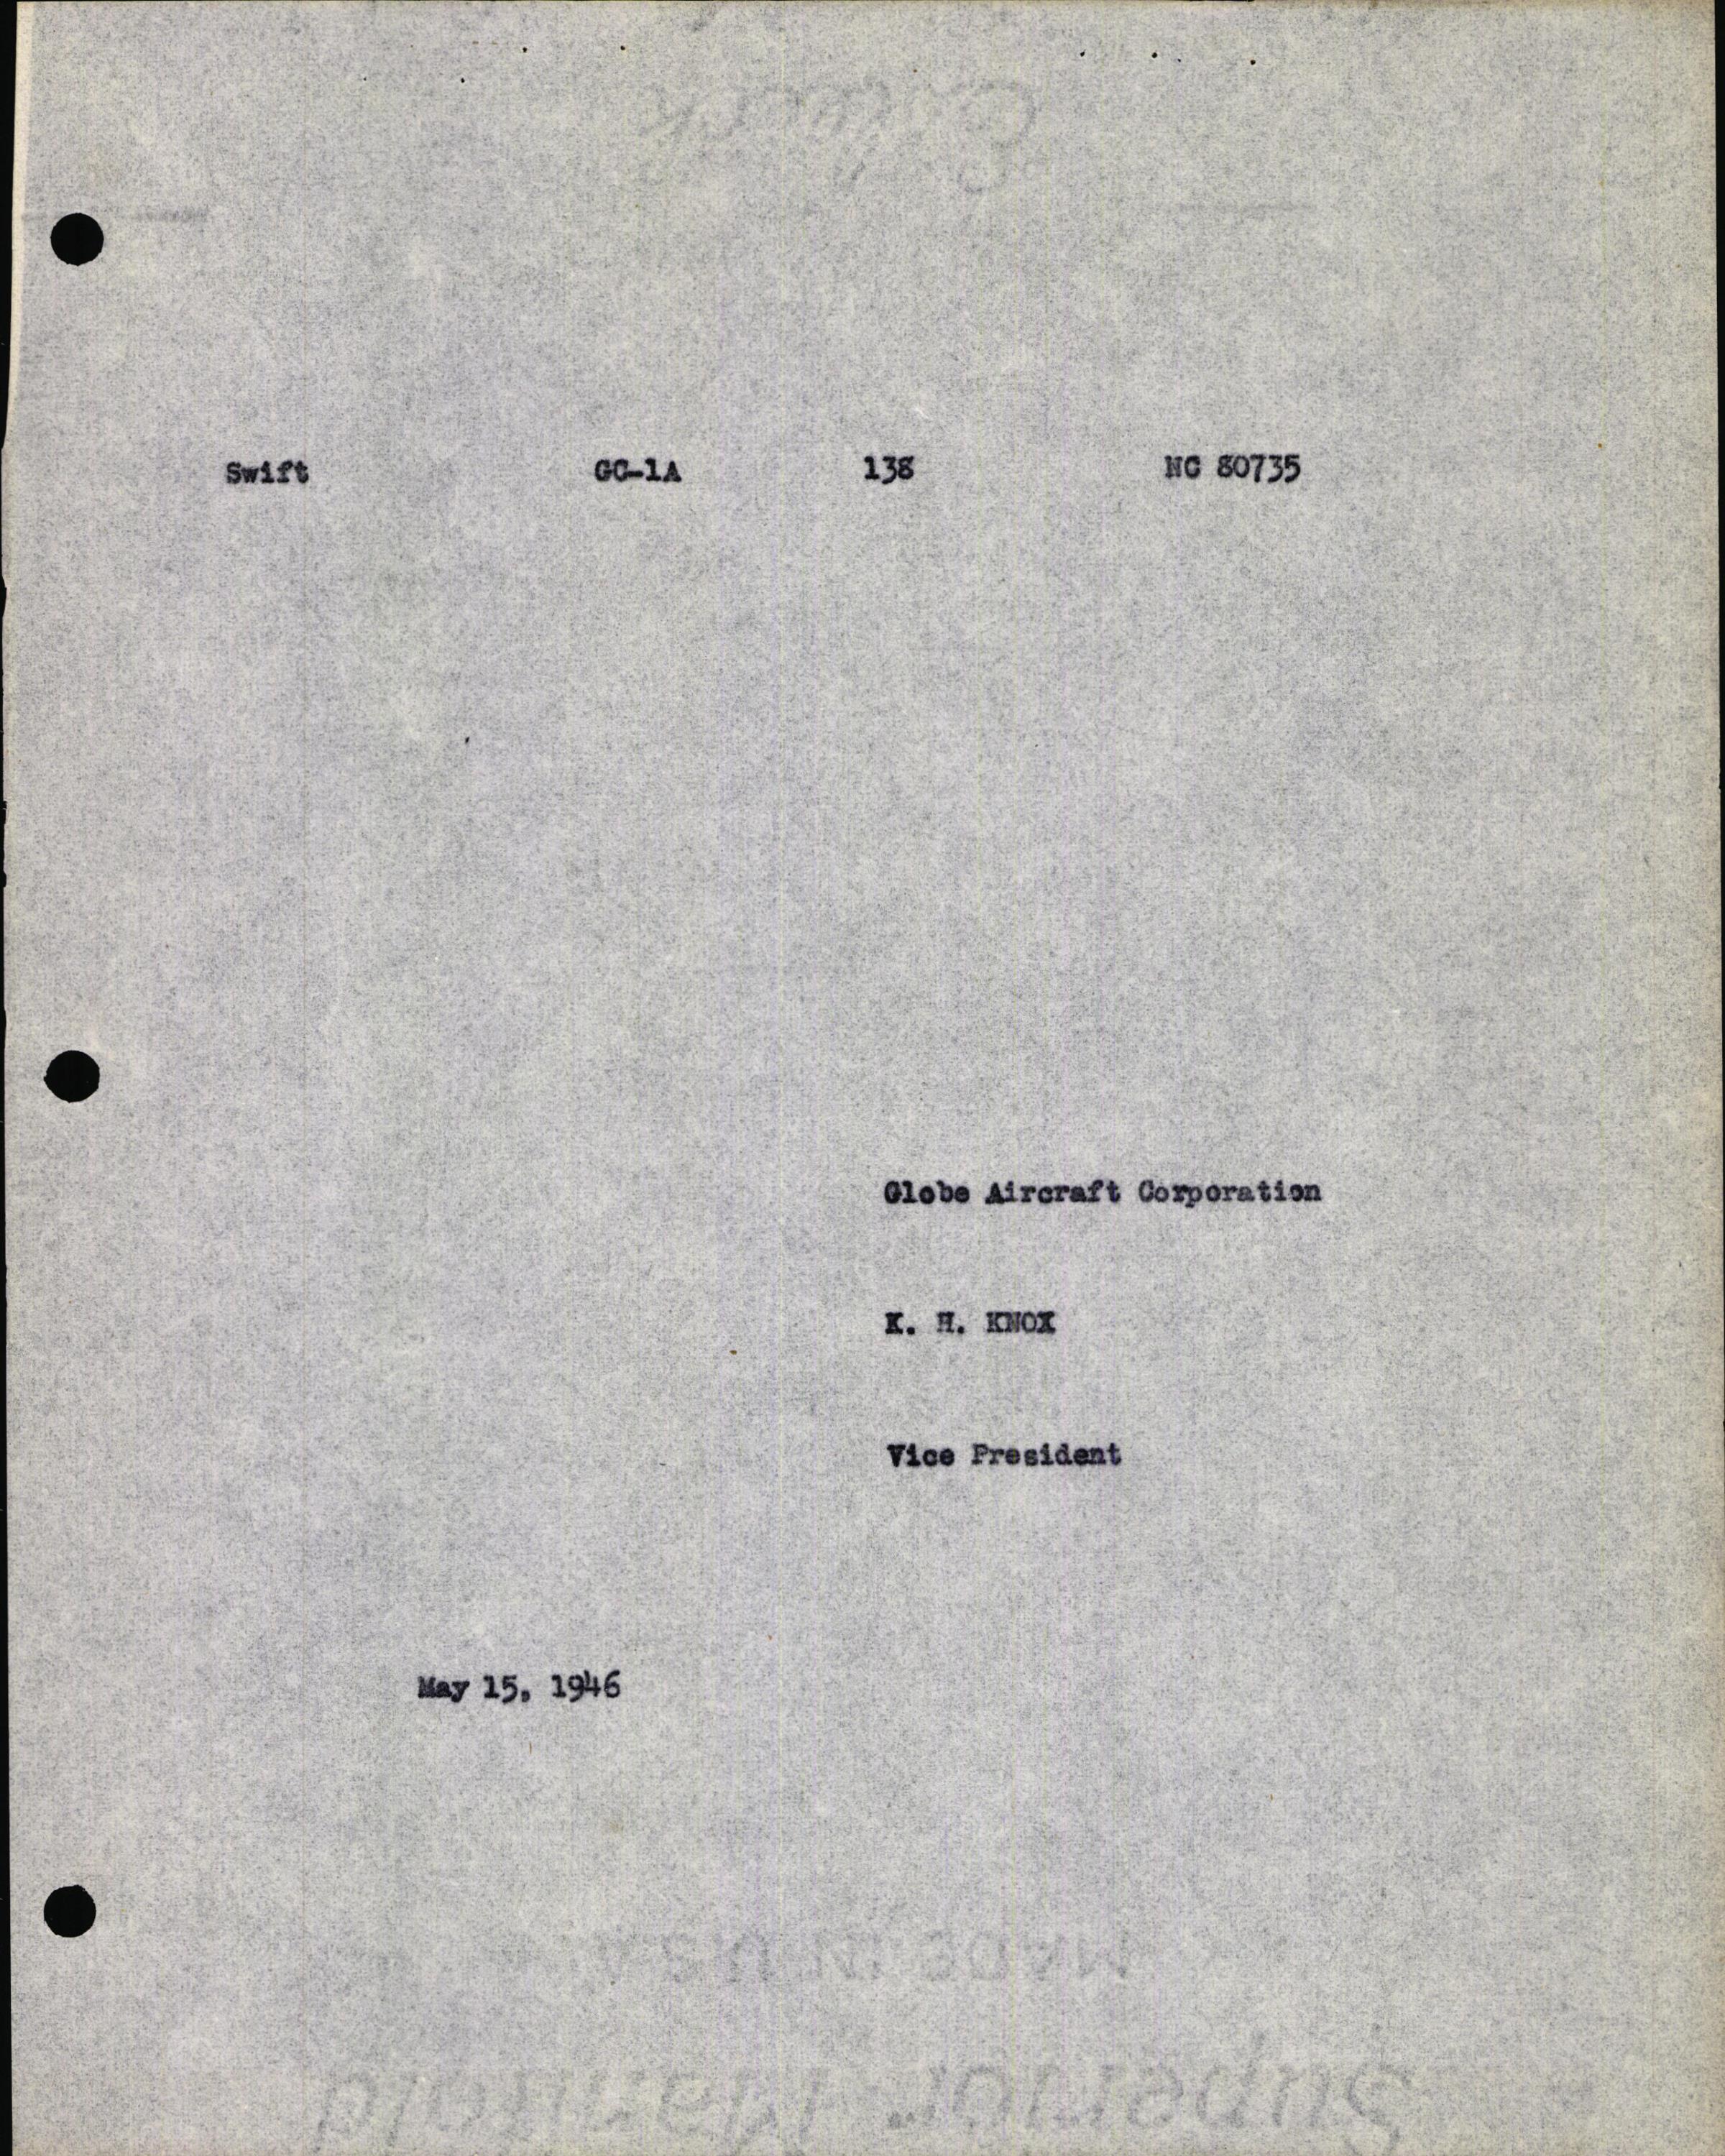 Sample page 5 from AirCorps Library document: Technical Information for Serial Number 138